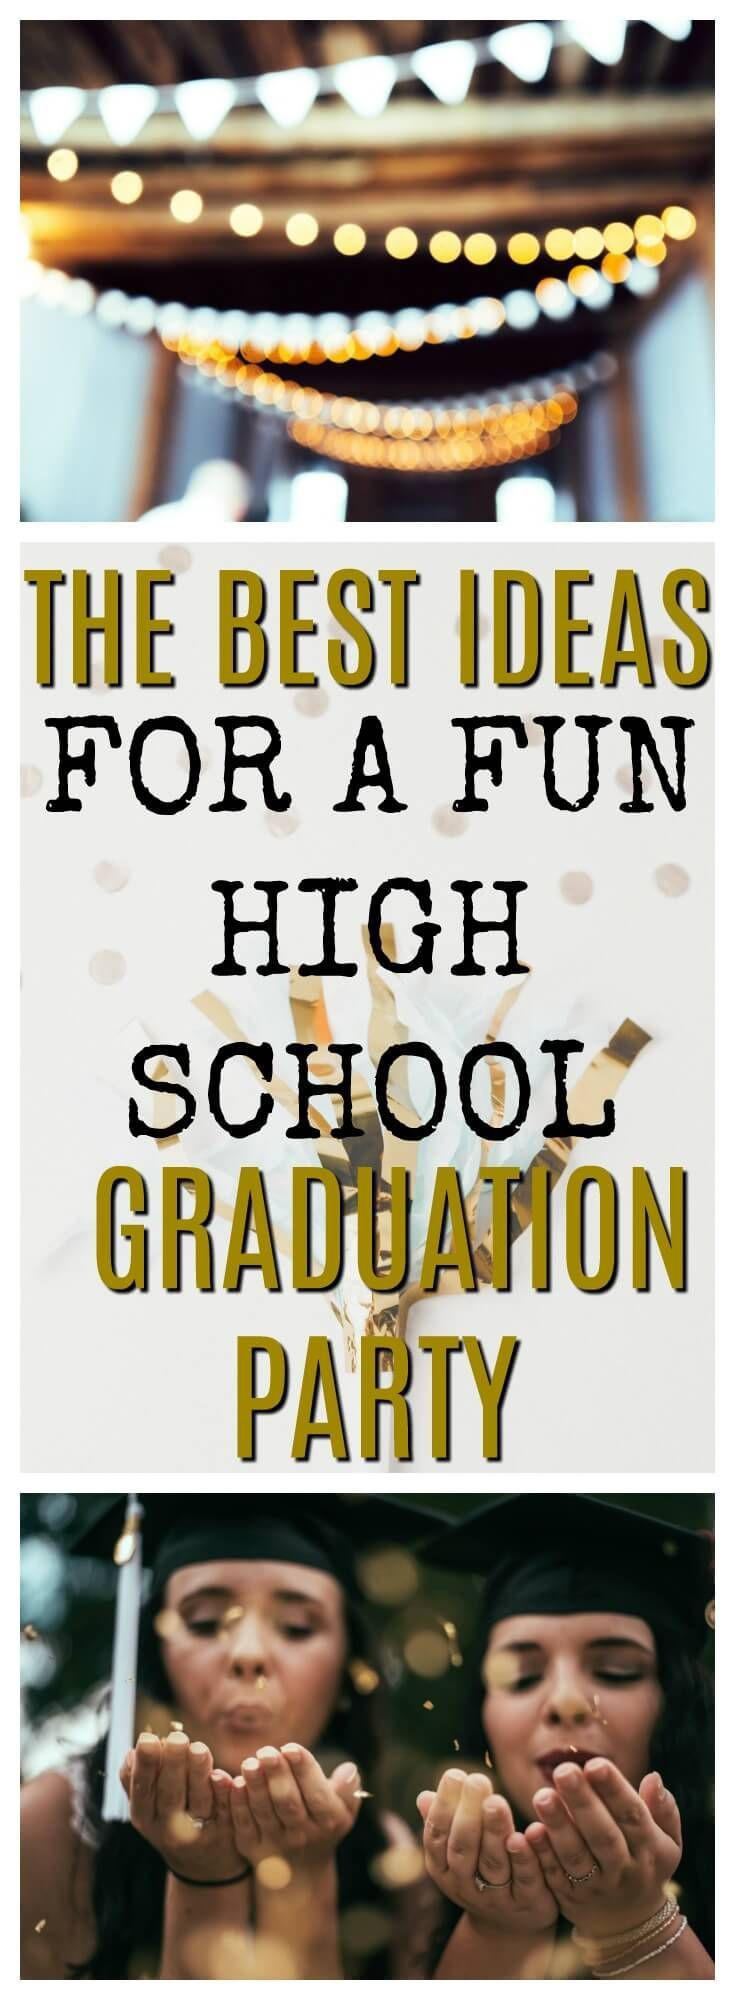 Games Ideas For Graduation Party
 Graduation Party Ideas 2020 How to Celebrate [step by